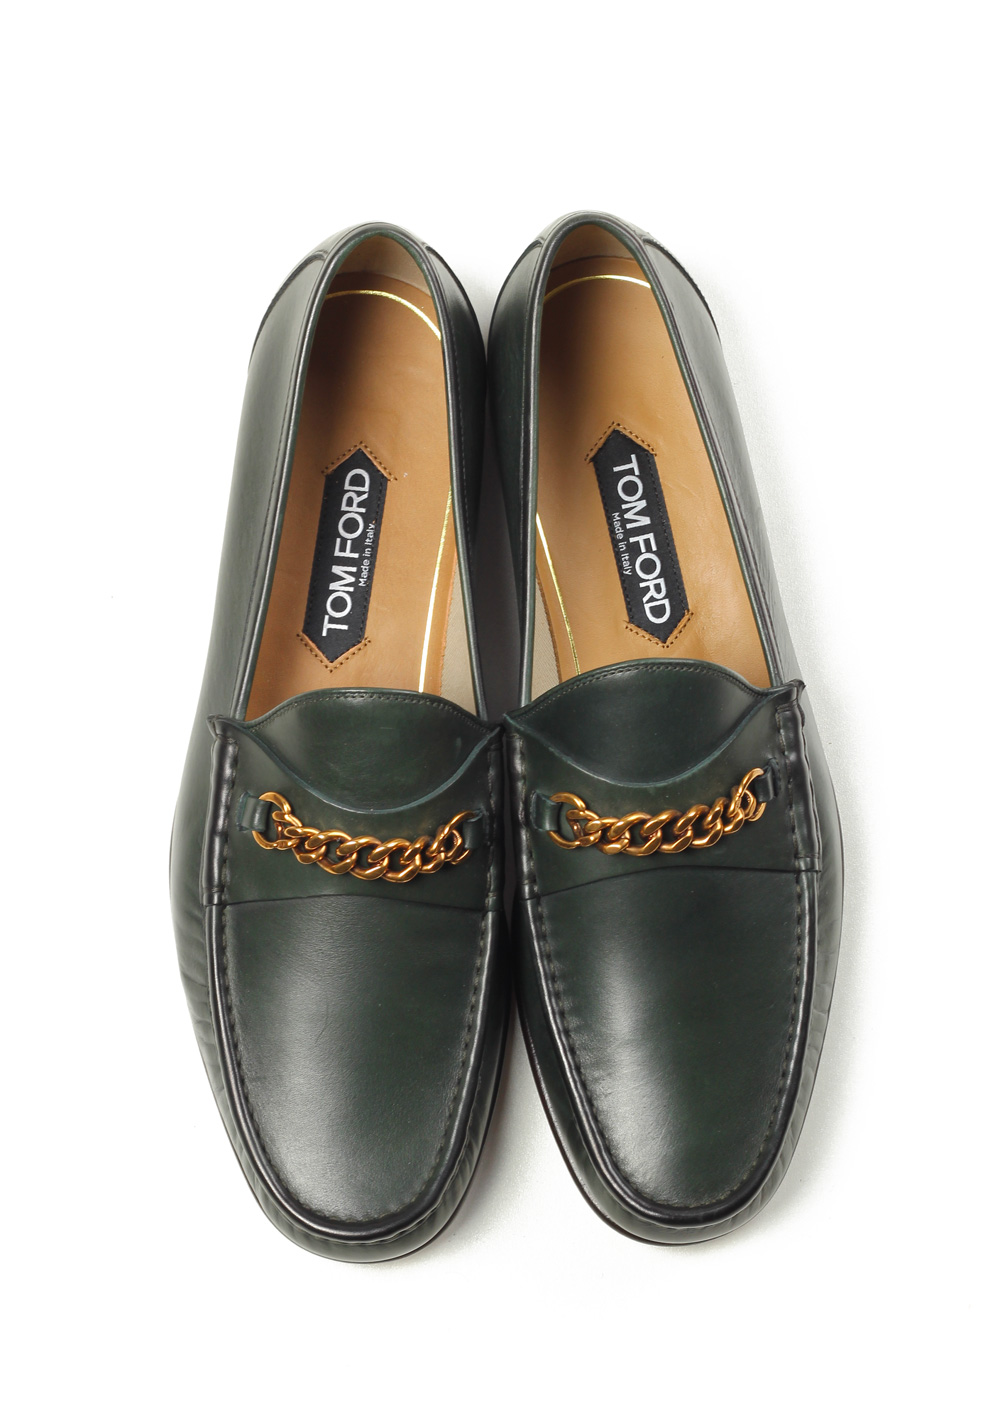 TOM FORD York Green Leather Chain Loafers Shoes Size 10,5 UK / 11,5 U.S. | Costume Limité